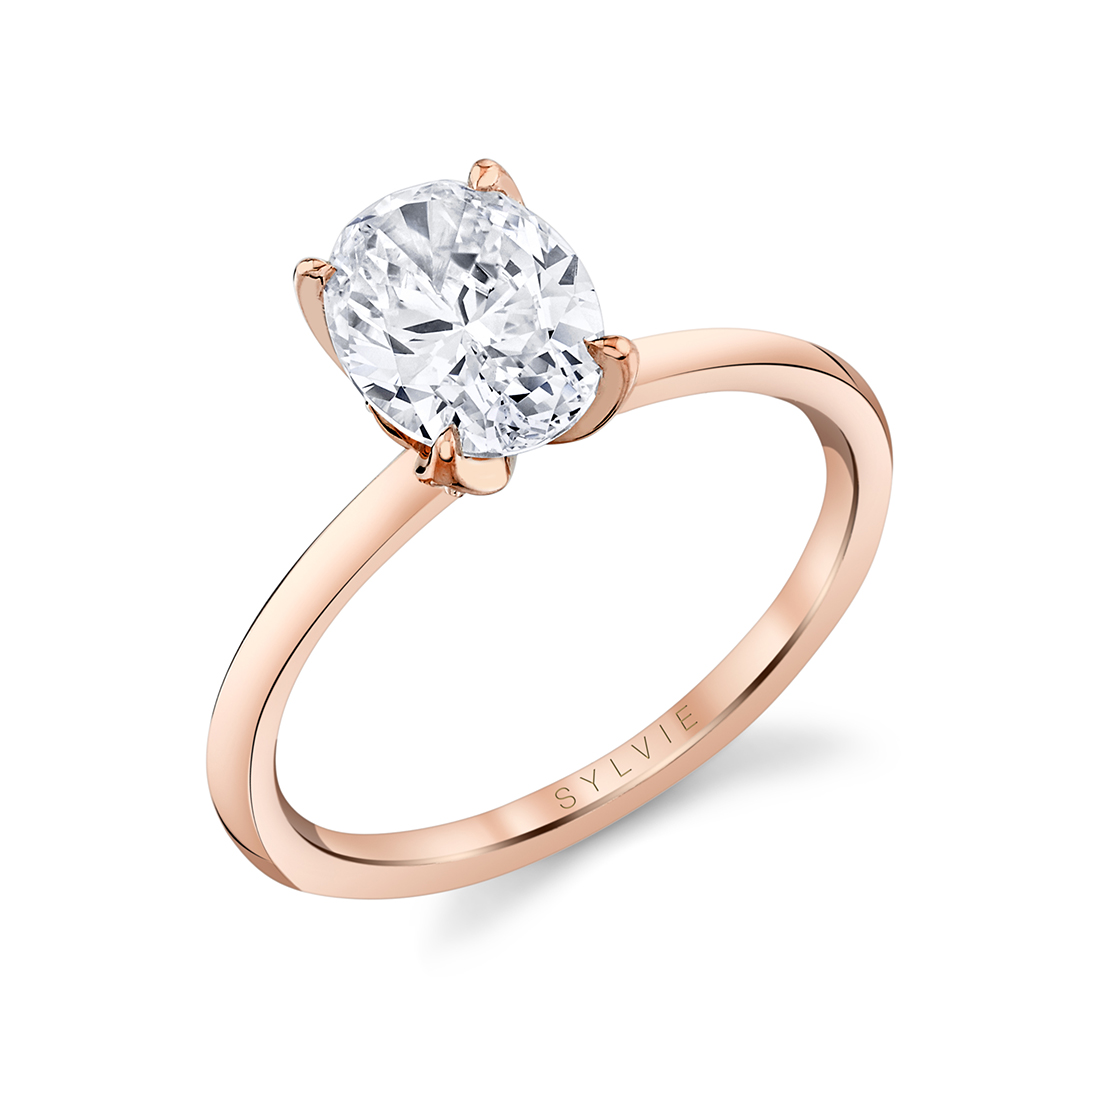 14K ROSE GOLD SOLITAIRE SETTING WITH .12CTTW ROUND SI CLARITY & G COLOR DIAMONDS SET IN THE PRONGS (2CT CUSHION CUT CENTER)